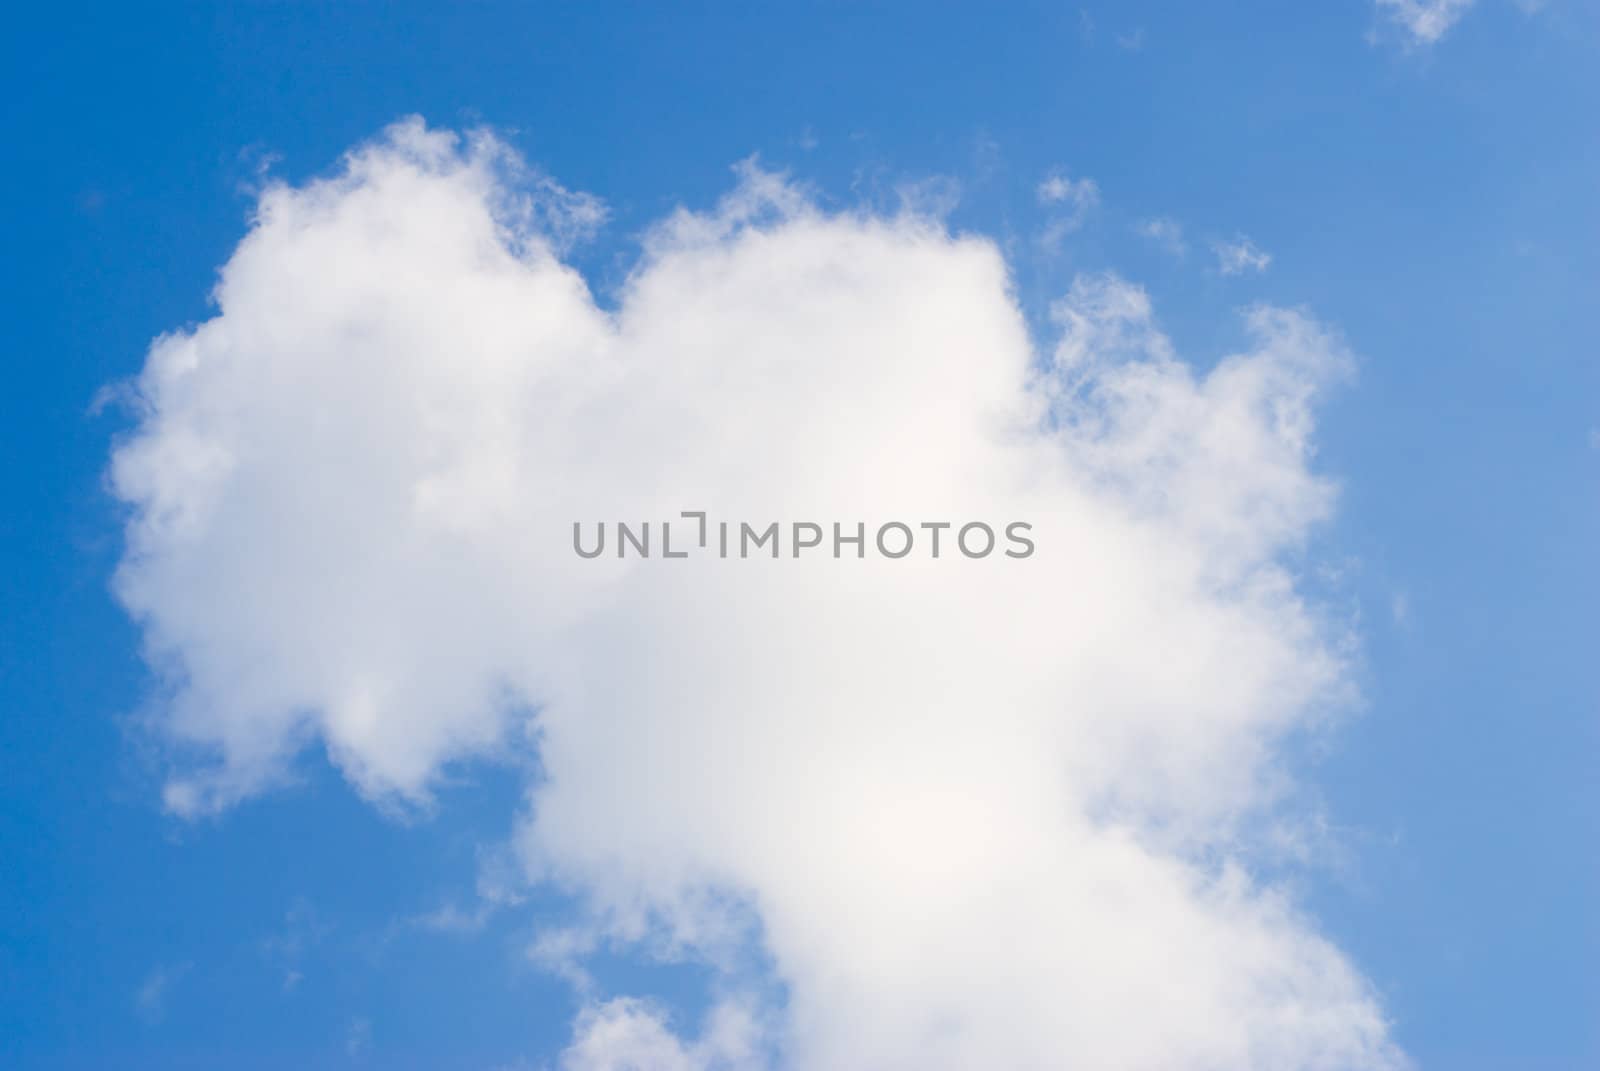 A large white cloud in the blue sky